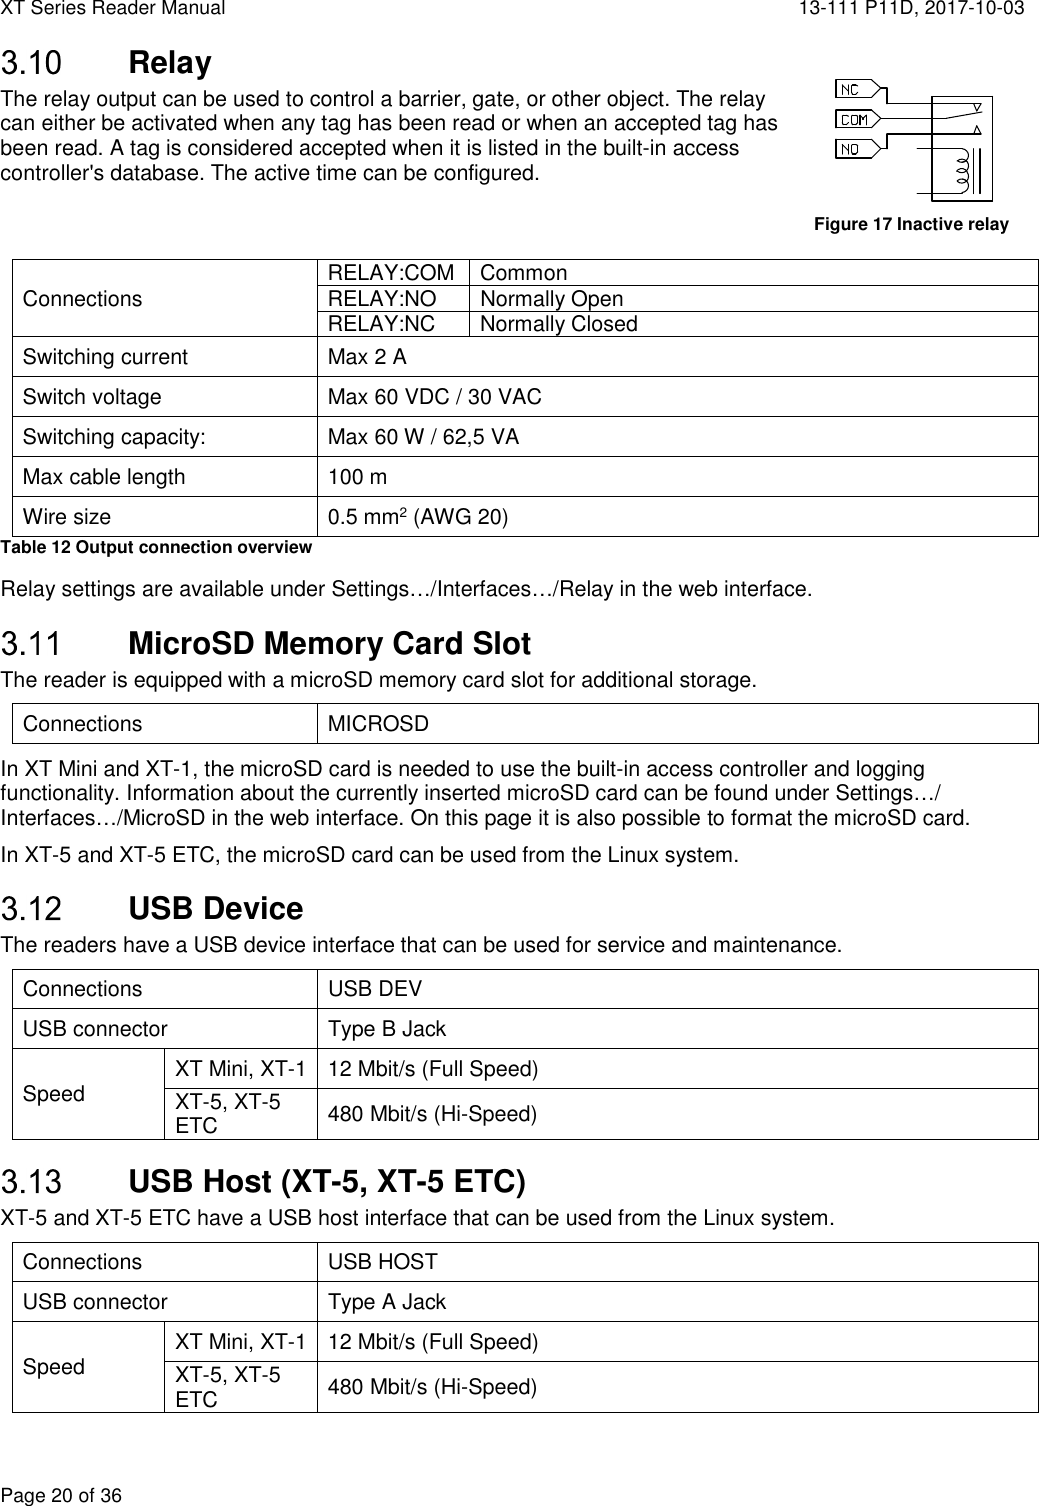 XT Series Reader Manual  13-111 P11D, 2017-10-03  Page 20 of 36  Relay The relay output can be used to control a barrier, gate, or other object. The relay can either be activated when any tag has been read or when an accepted tag has been read. A tag is considered accepted when it is listed in the built-in access controller&apos;s database. The active time can be configured.    Connections RELAY:COM Common RELAY:NO  Normally Open RELAY:NC Normally Closed Switching current  Max 2 A Switch voltage    Max 60 VDC / 30 VAC Switching capacity:  Max 60 W / 62,5 VA Max cable length  100 m Wire size  0.5 mm2 (AWG 20) Table 12 Output connection overview Relay settings are available under Settings…/Interfaces…/Relay in the web interface.  MicroSD Memory Card Slot The reader is equipped with a microSD memory card slot for additional storage. Connections  MICROSD In XT Mini and XT-1, the microSD card is needed to use the built-in access controller and logging functionality. Information about the currently inserted microSD card can be found under Settings…/ Interfaces…/MicroSD in the web interface. On this page it is also possible to format the microSD card. In XT-5 and XT-5 ETC, the microSD card can be used from the Linux system.  USB Device The readers have a USB device interface that can be used for service and maintenance. Connections  USB DEV USB connector  Type B Jack Speed  XT Mini, XT-1 12 Mbit/s (Full Speed) XT-5, XT-5 ETC  480 Mbit/s (Hi-Speed)  USB Host (XT-5, XT-5 ETC) XT-5 and XT-5 ETC have a USB host interface that can be used from the Linux system. Connections  USB HOST USB connector  Type A Jack Speed  XT Mini, XT-1 12 Mbit/s (Full Speed) XT-5, XT-5 ETC 480 Mbit/s (Hi-Speed) Figure 17 Inactive relay 